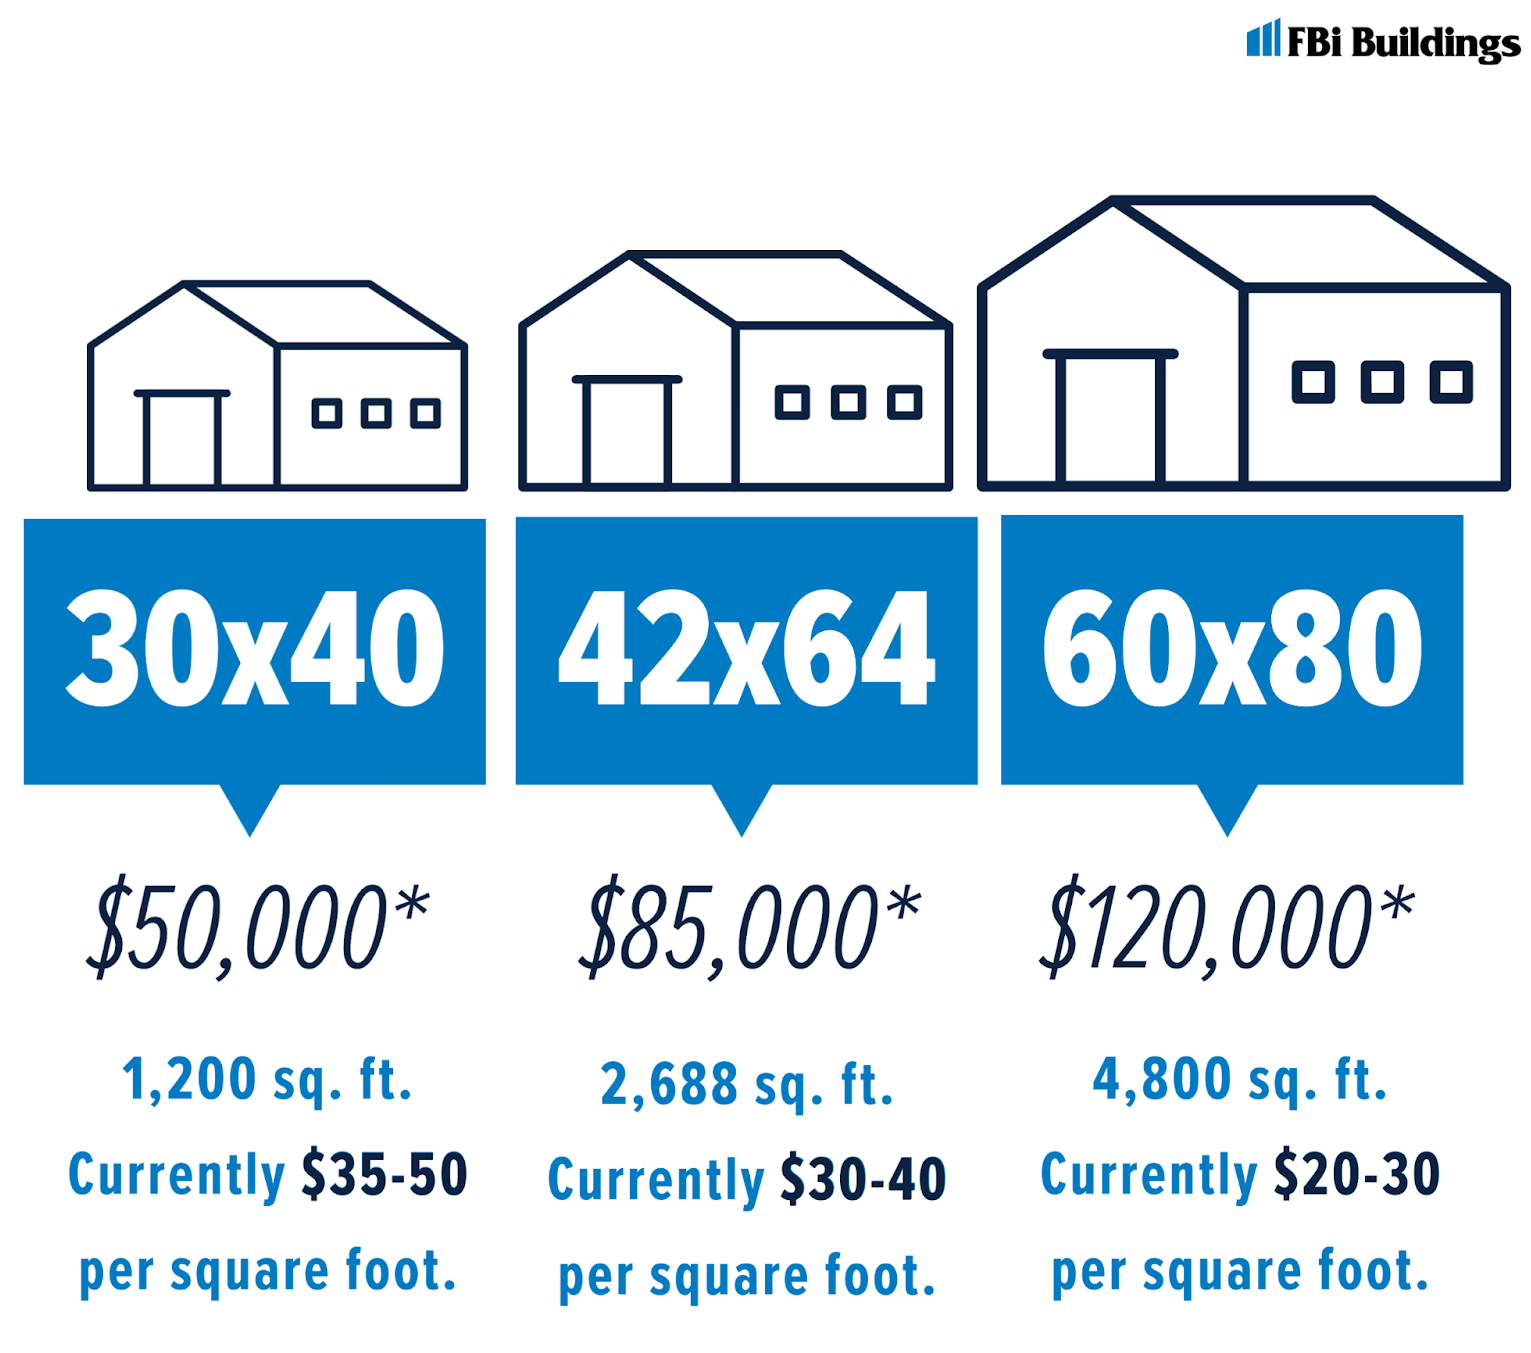 Current pole barn prices per square foot. subject to change at anytime. 